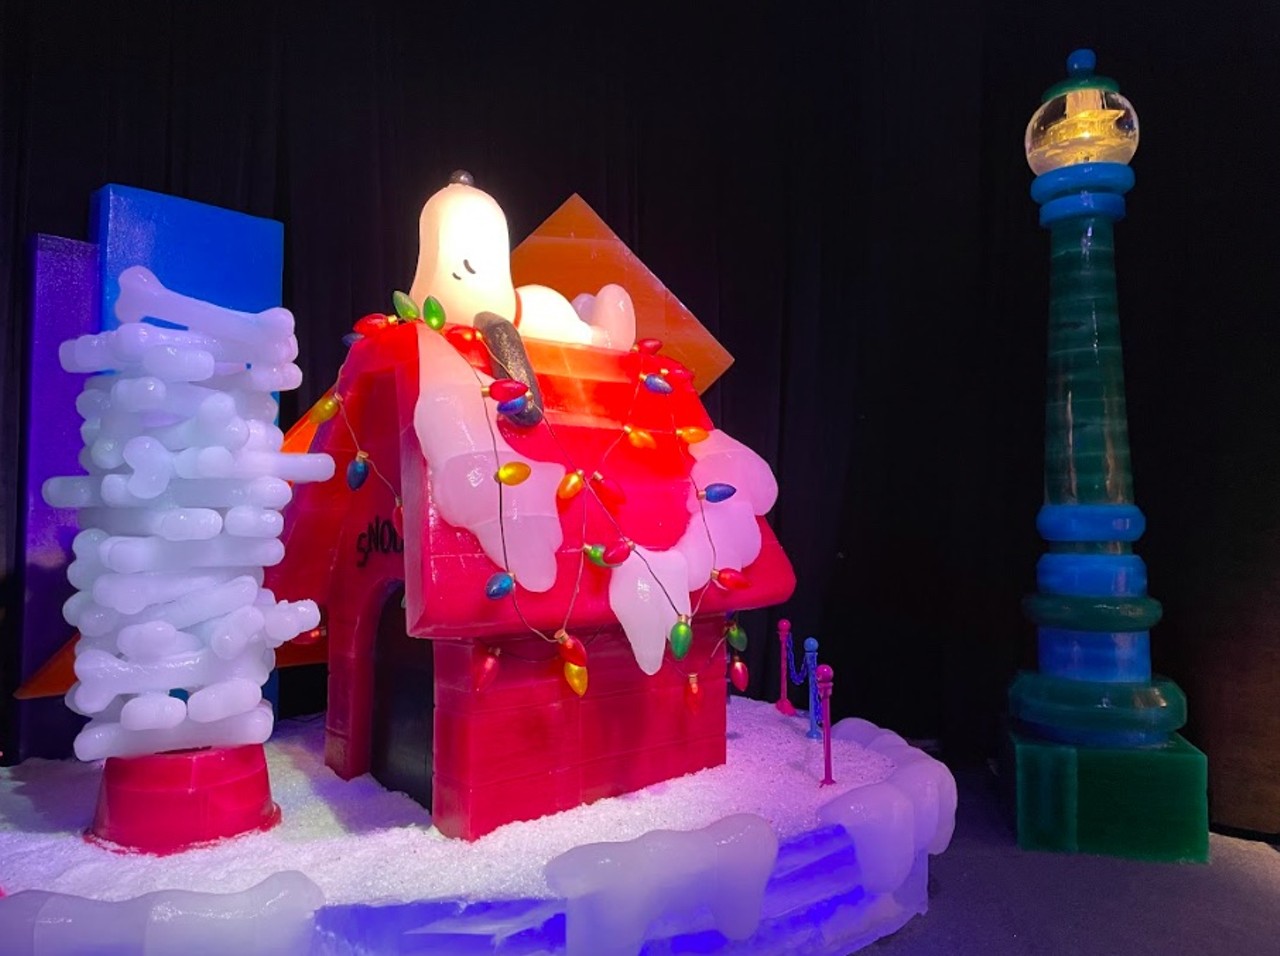 Photos: ICE offers chills and thrills in ‘A Charlie Brown Christmas’ at Gaylord Palms